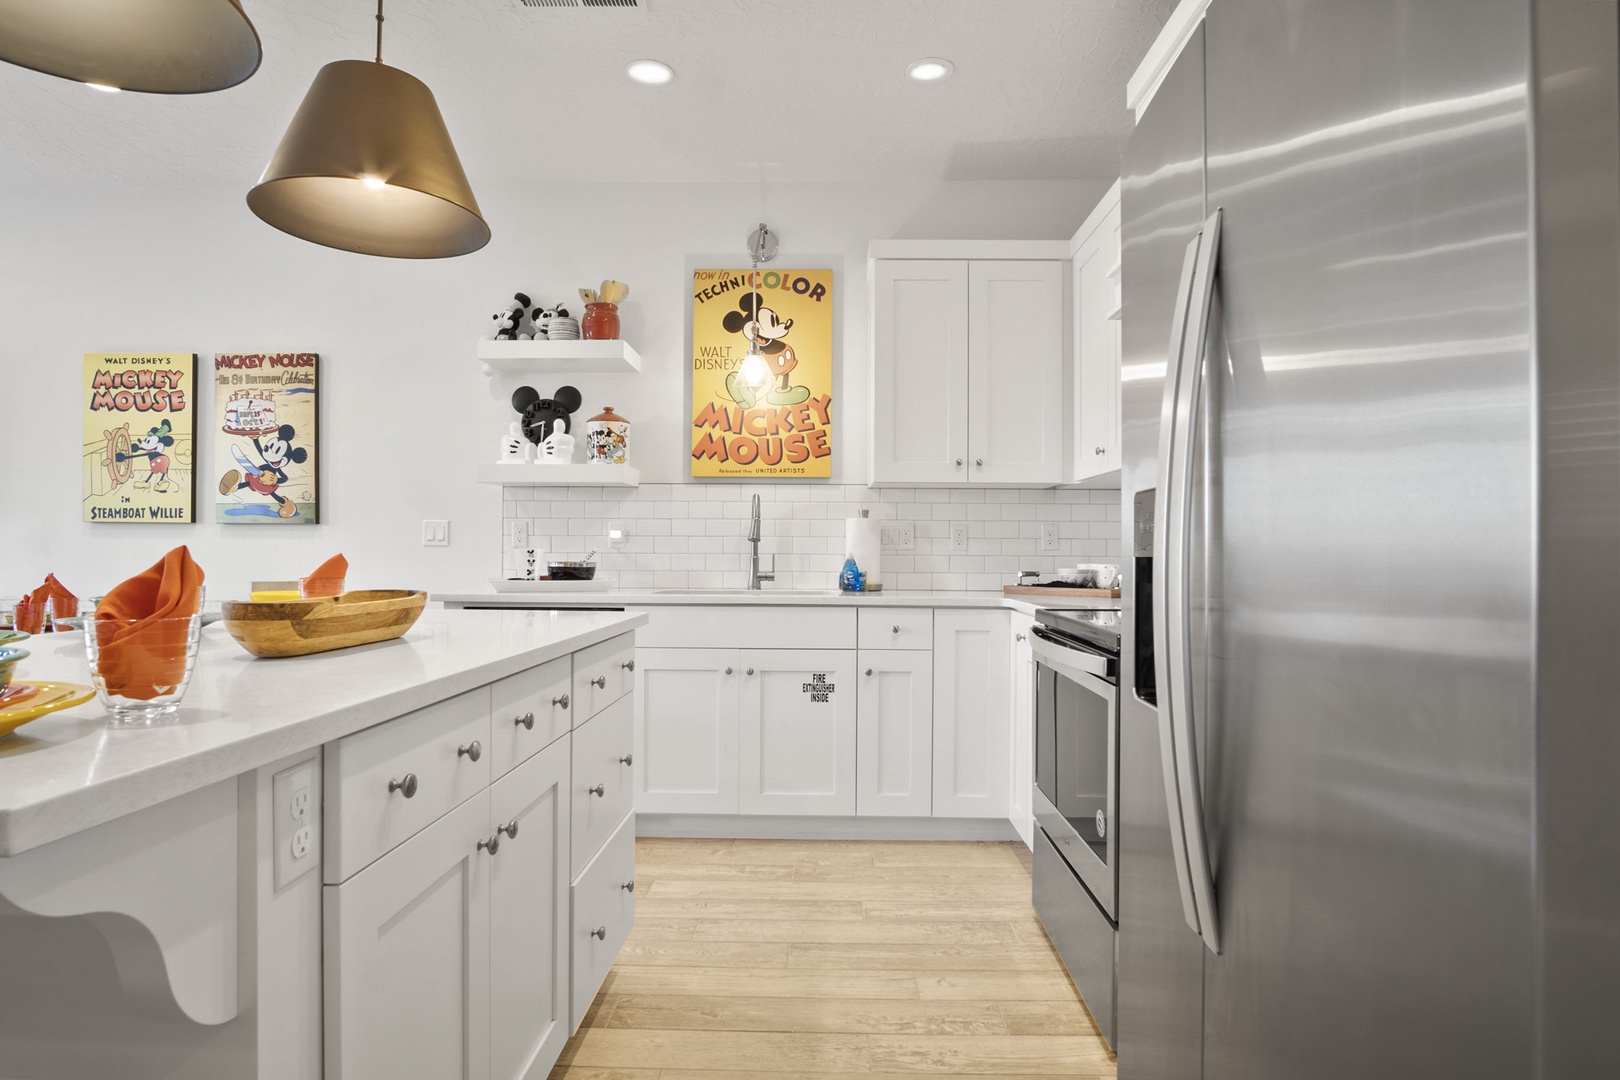 The updated kitchen offers ample storage/counter space and great amenities